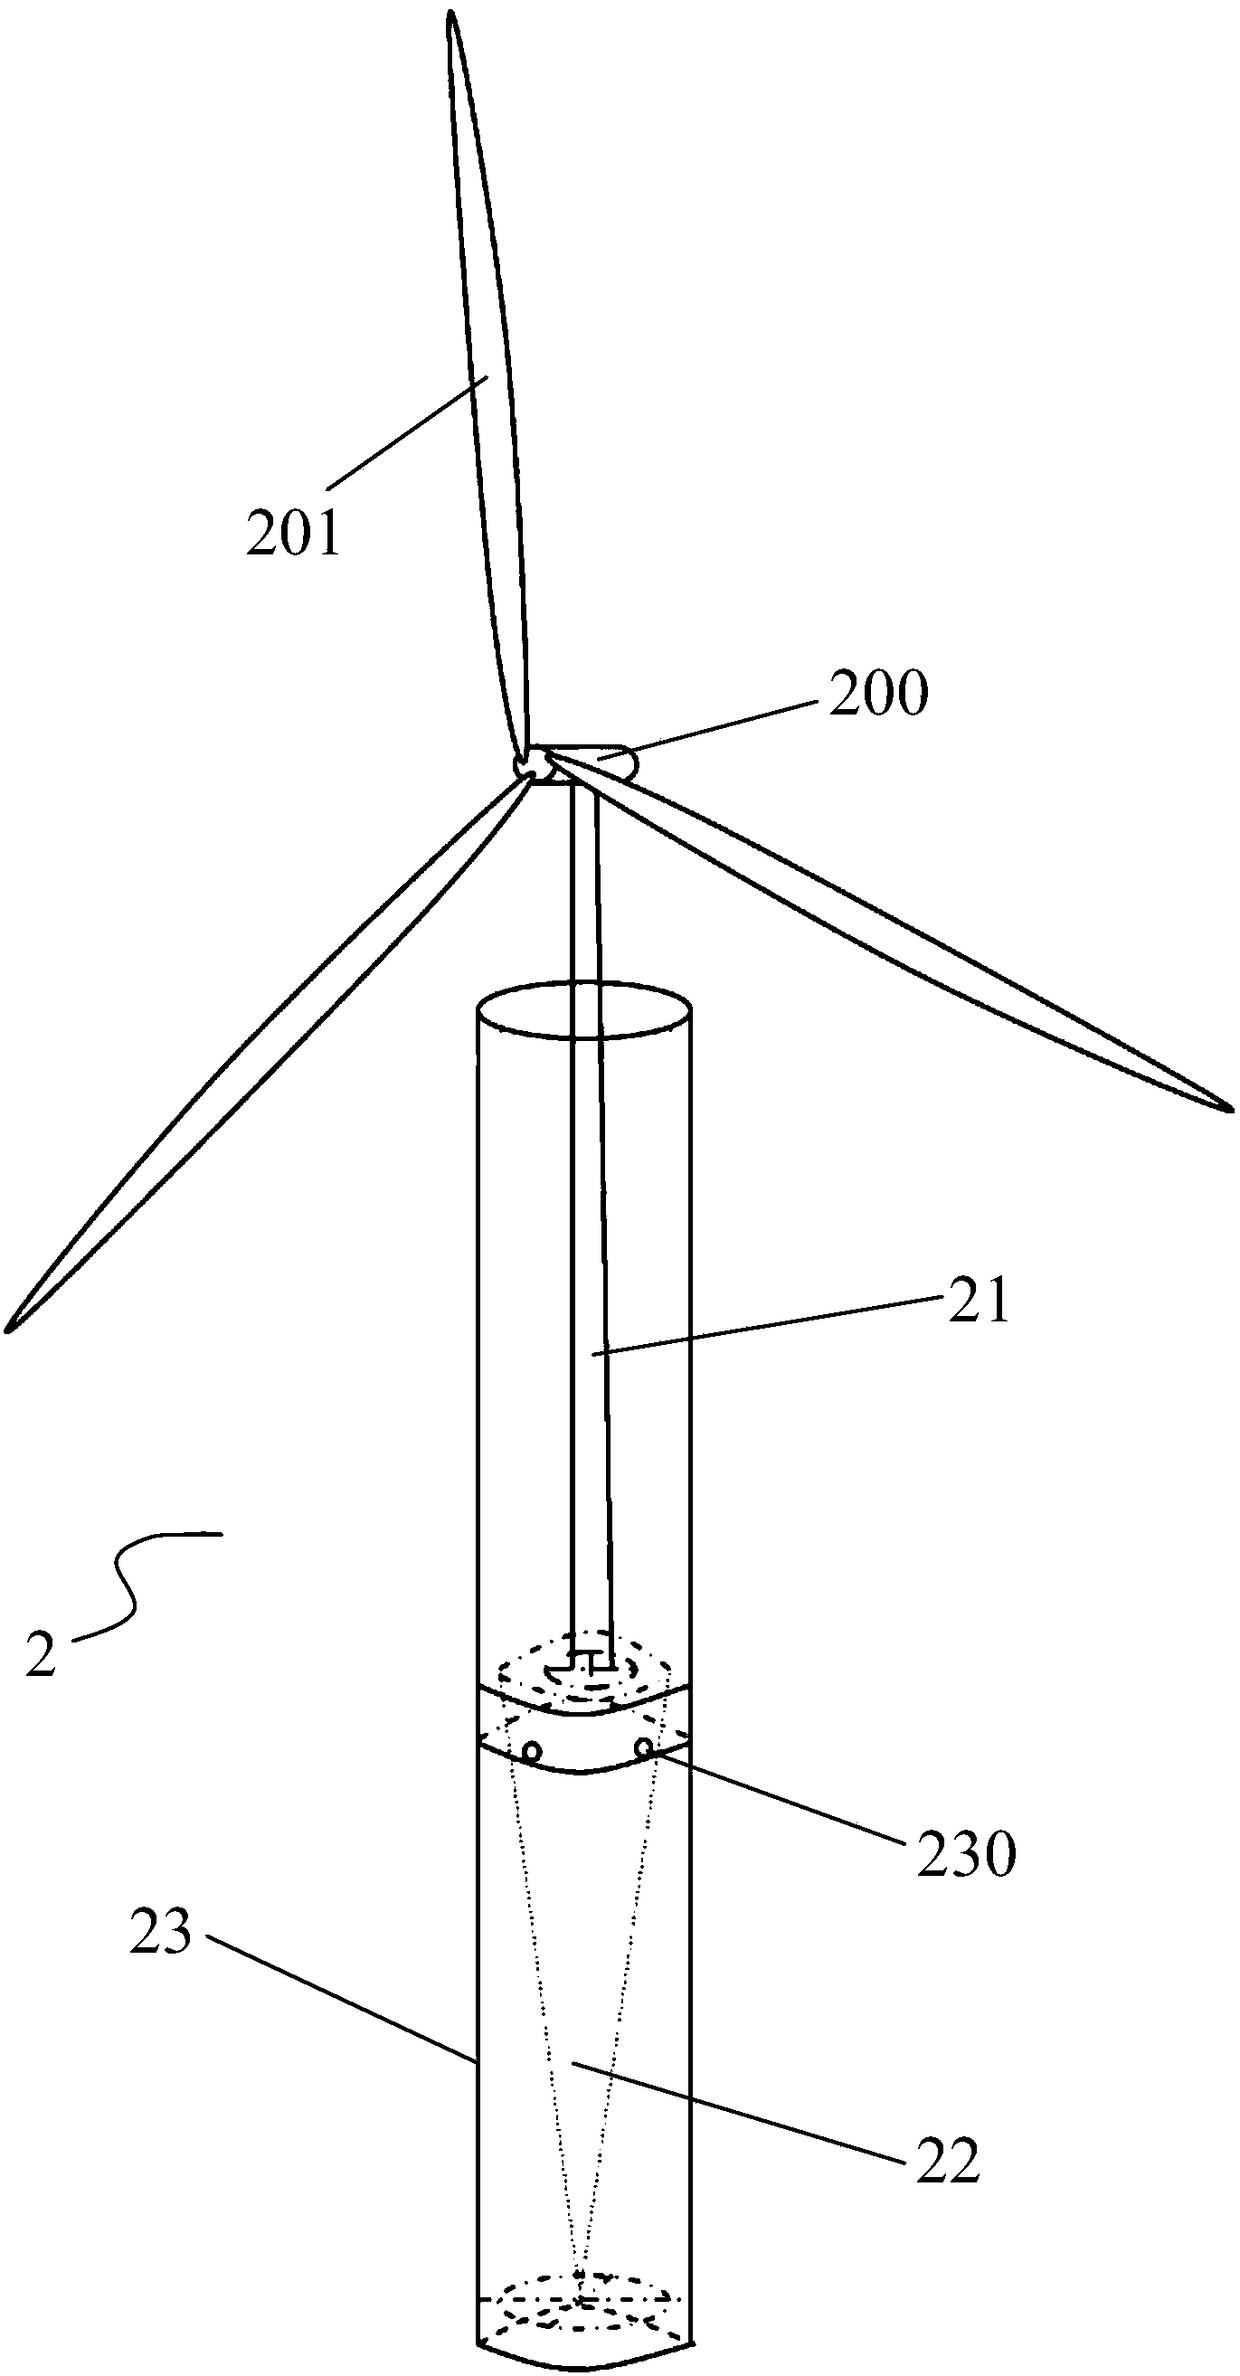 Stable and typhoon-resistant wind turbine generator system for floating wind farm